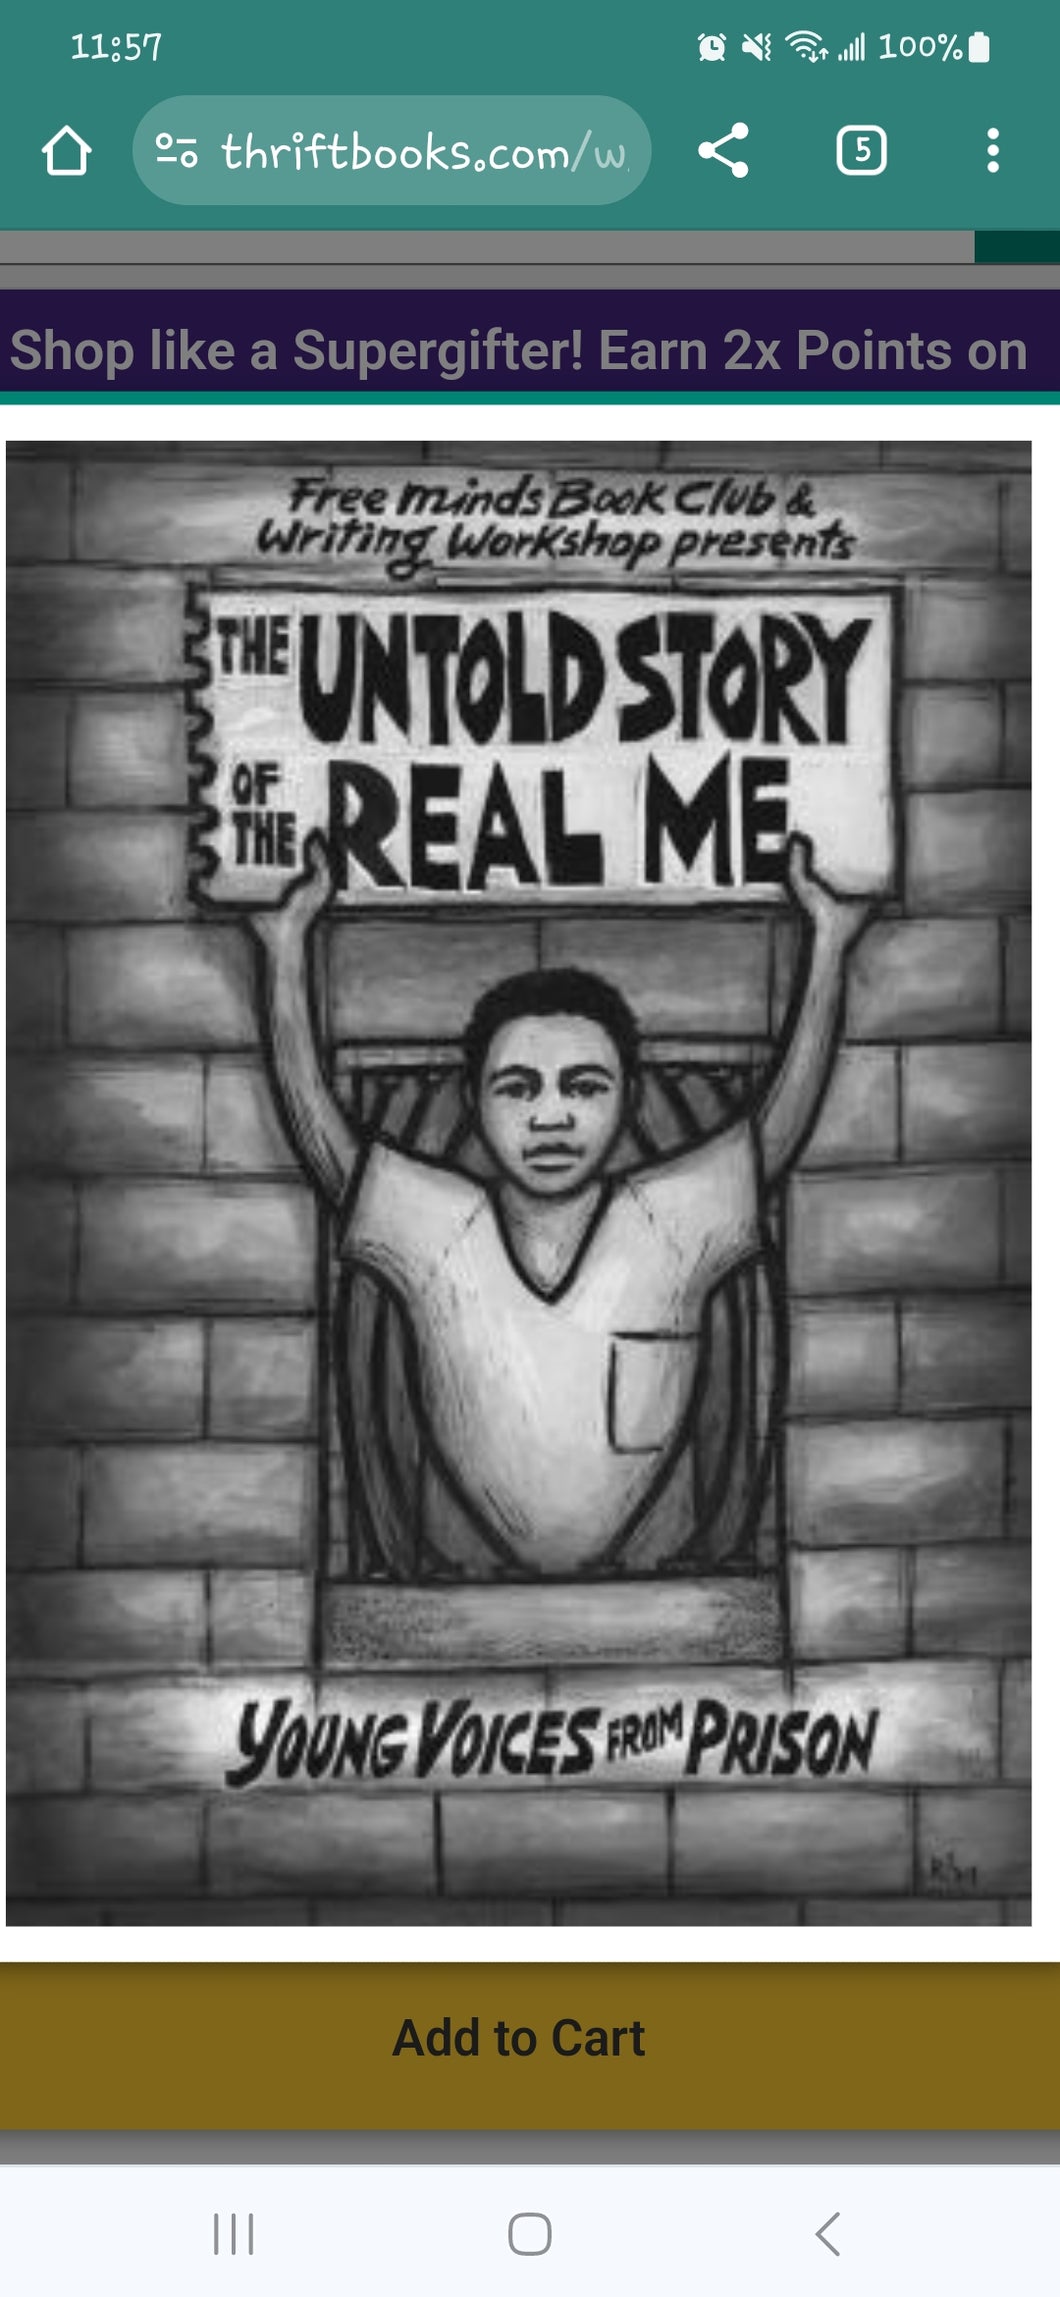 The Untold Story of the Real Me: Young Voices from Prison